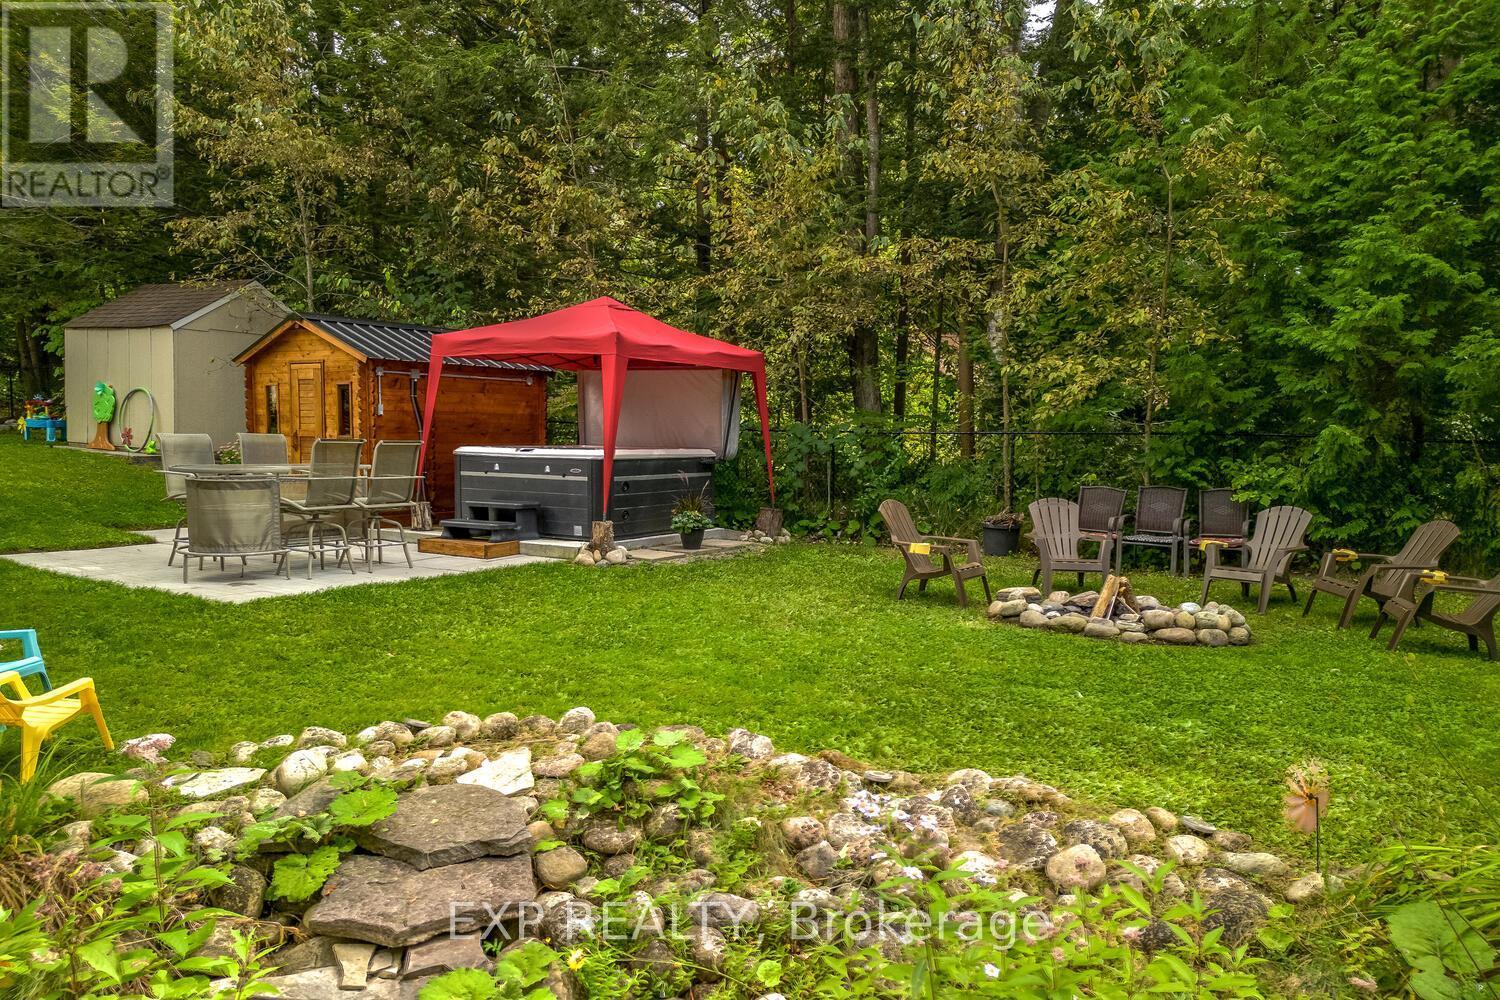 












32 FOREST RD

,
Tiny,




Ontario
L0L2J0

